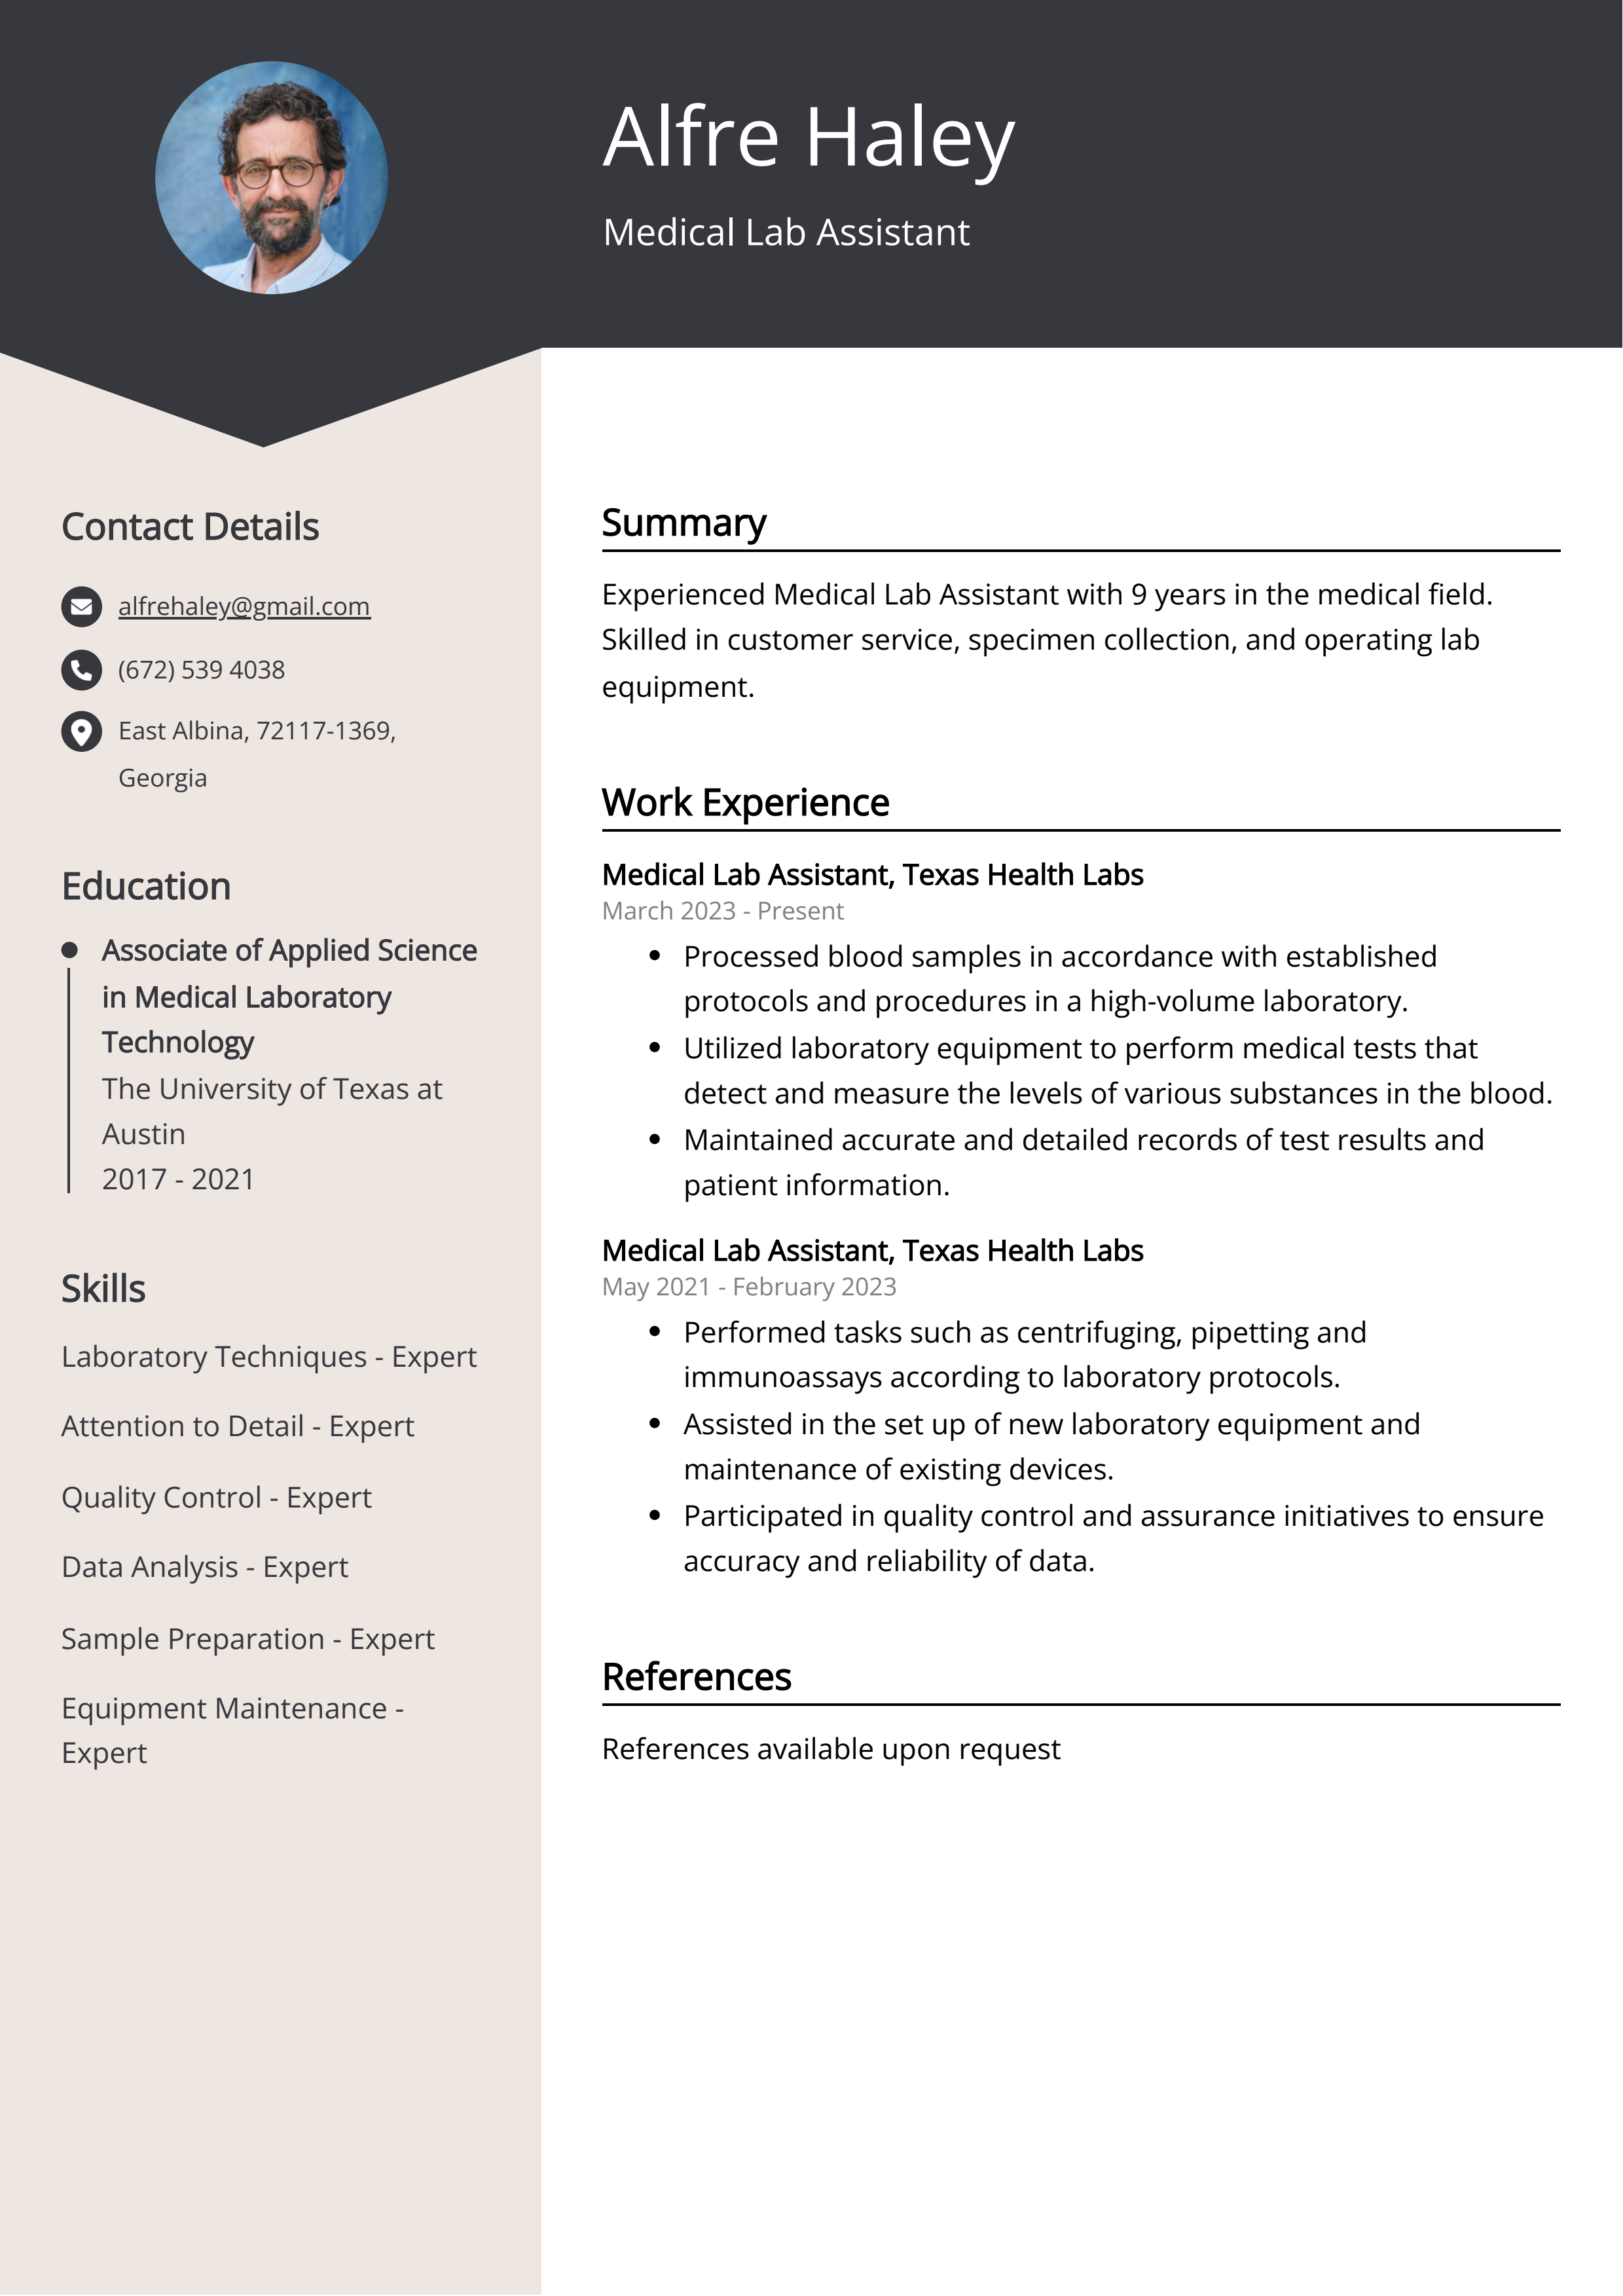 Medical Lab Assistant CV Example